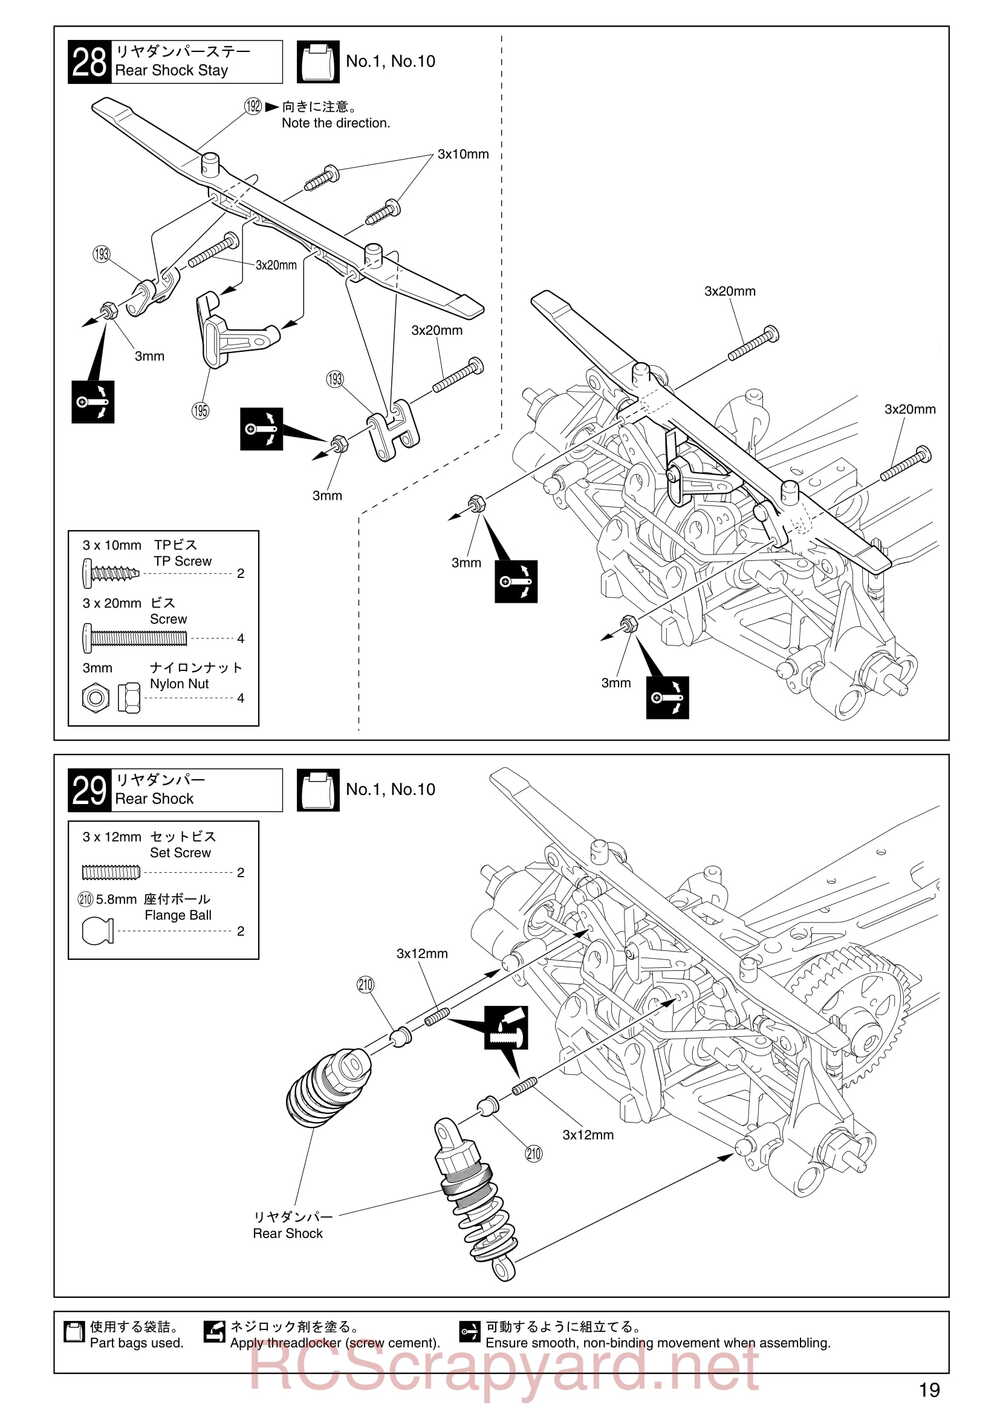 Kyosho - 31102 - V-One RR - Manual - Page 19